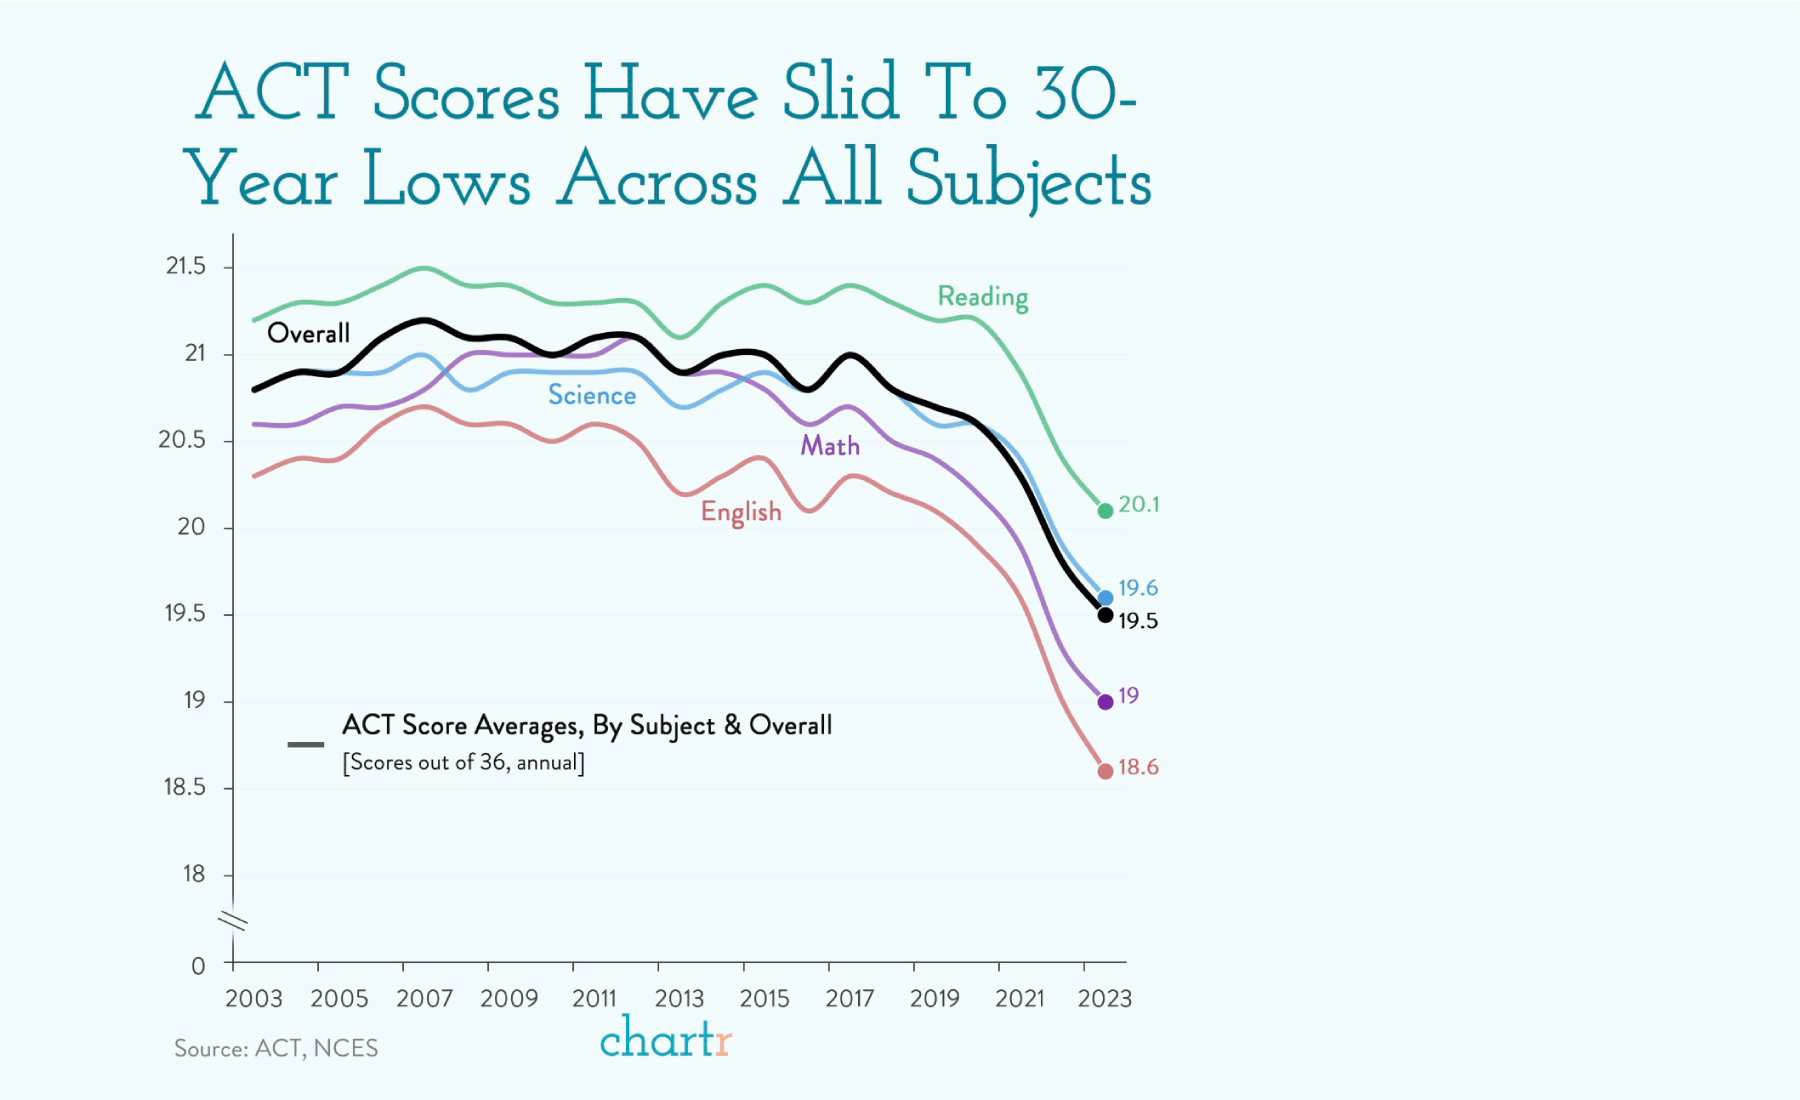 Act scores have slid to 30 year lows across all subjects